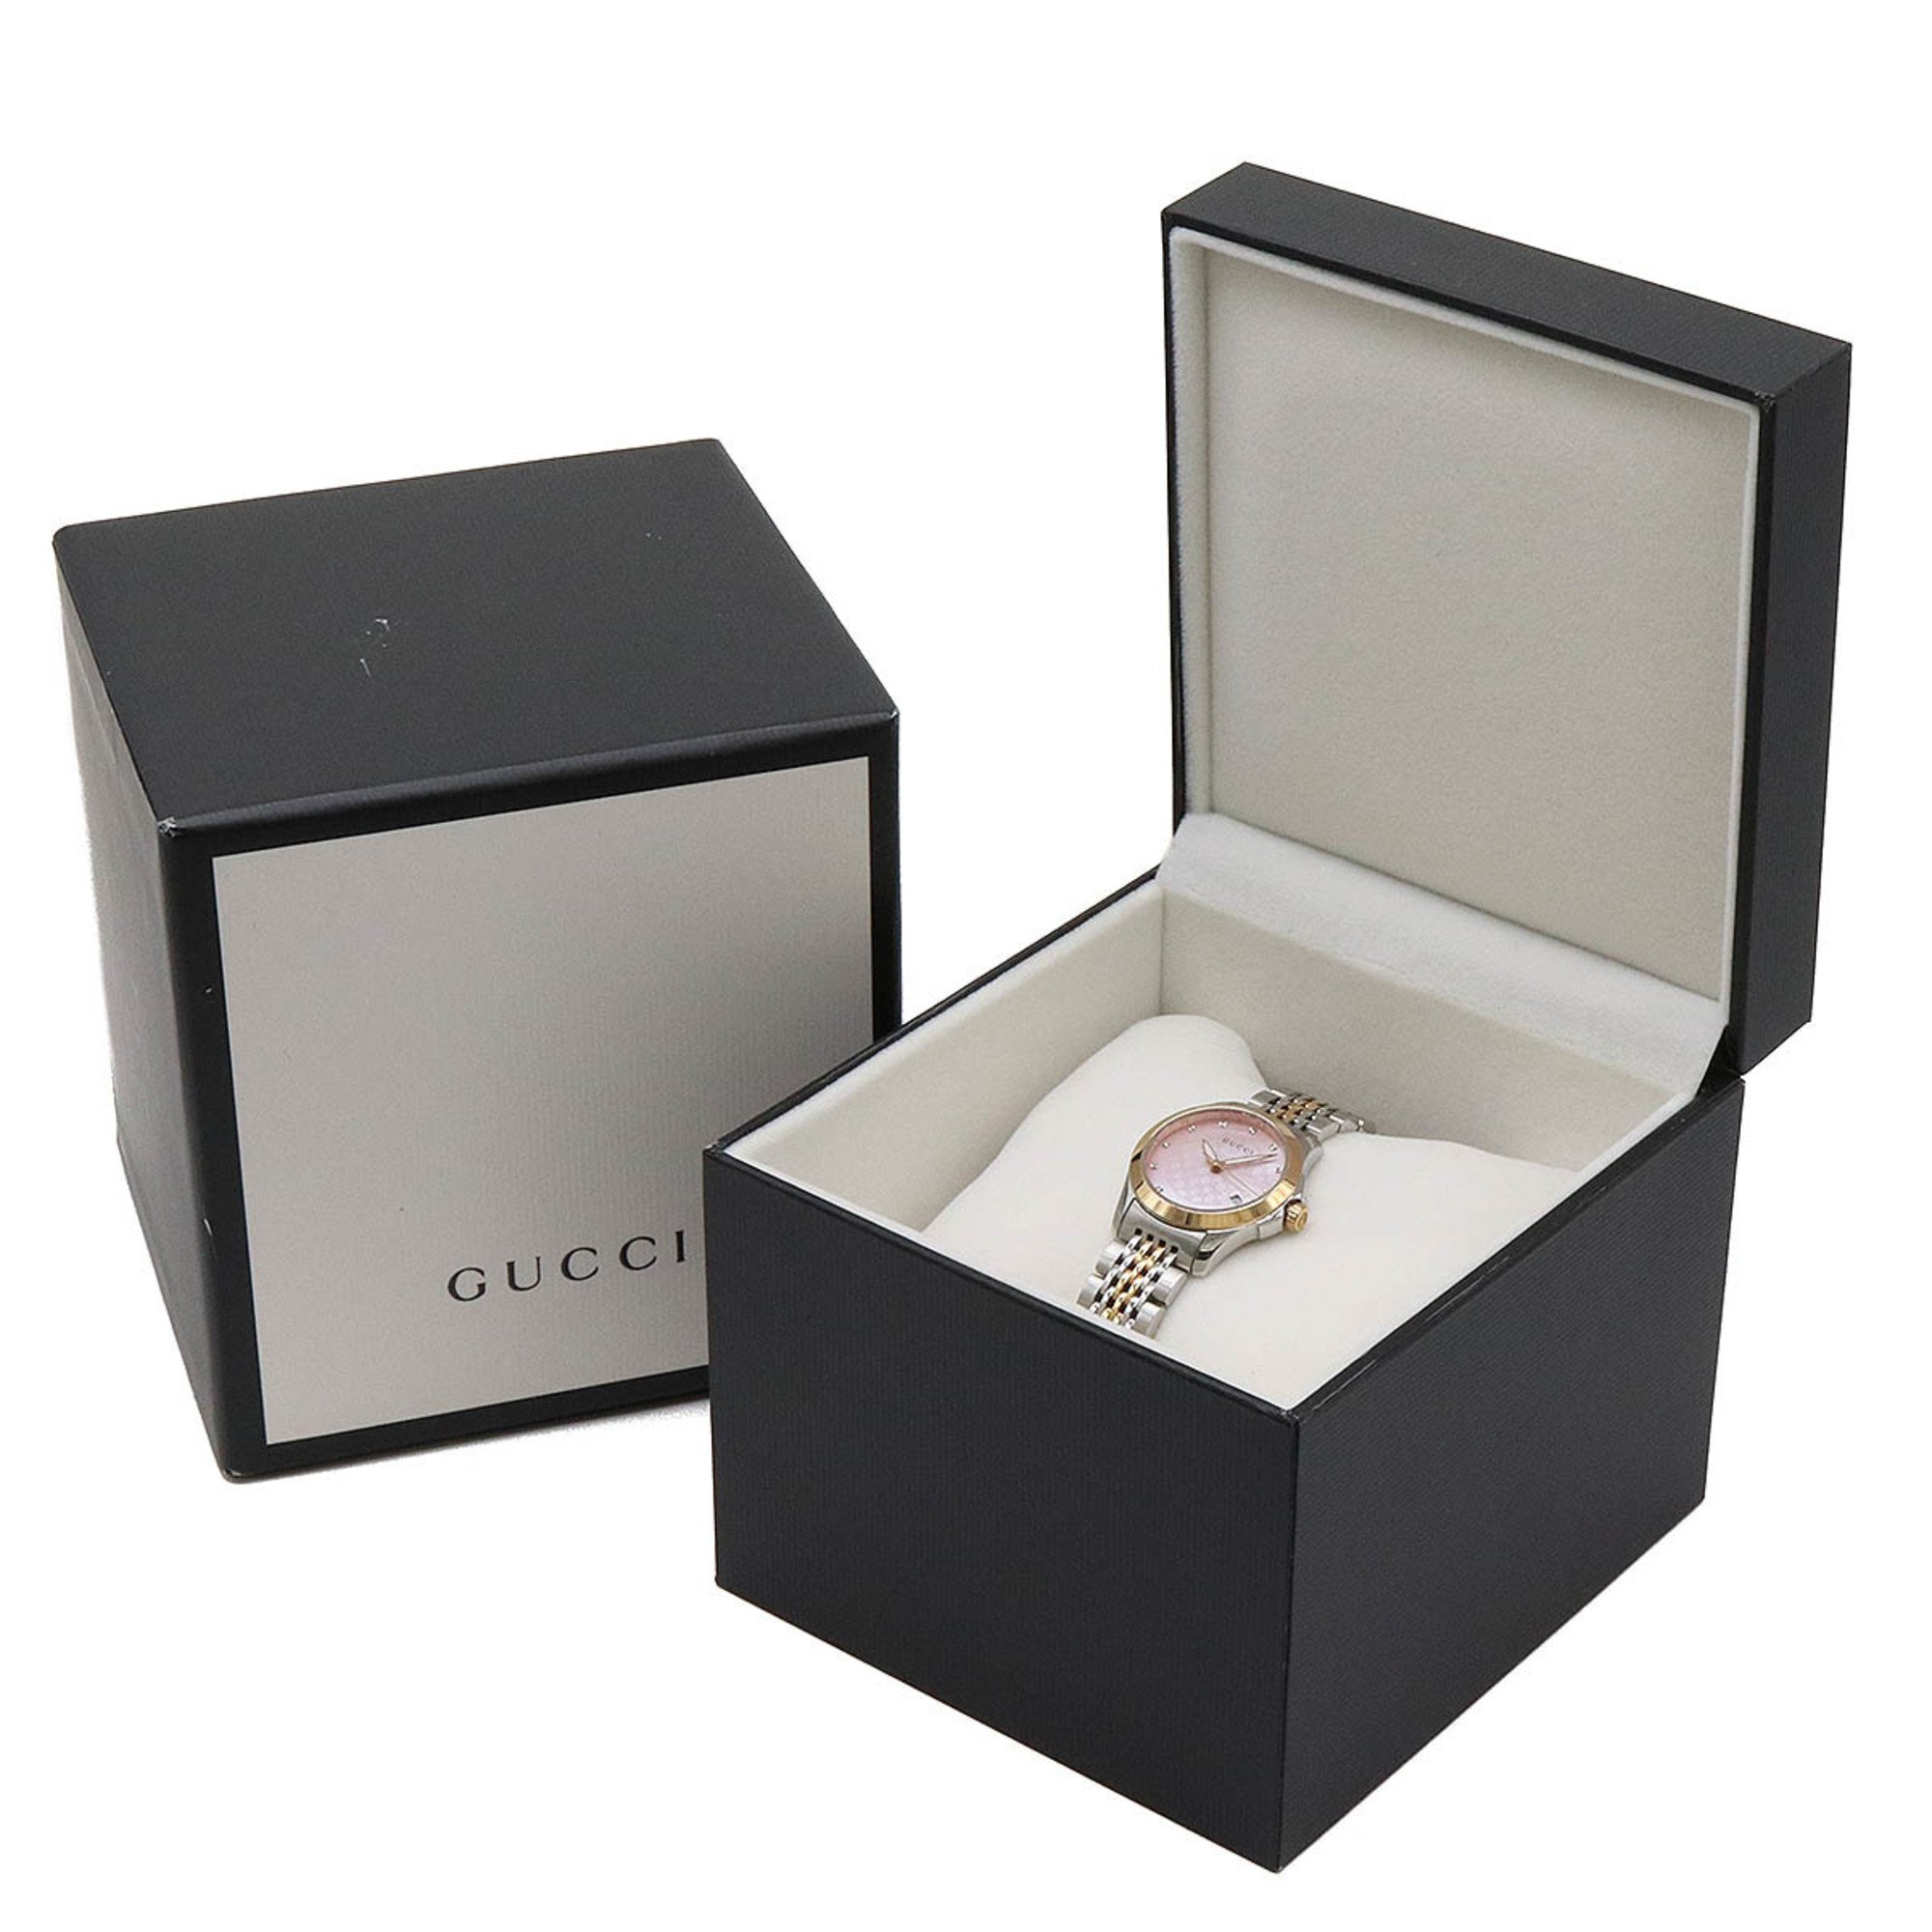 GUCCI G Timeless Collection GG Date Pink Shell Dial SS PGPVD Ladies Quartz Watch 126.5 YA126538